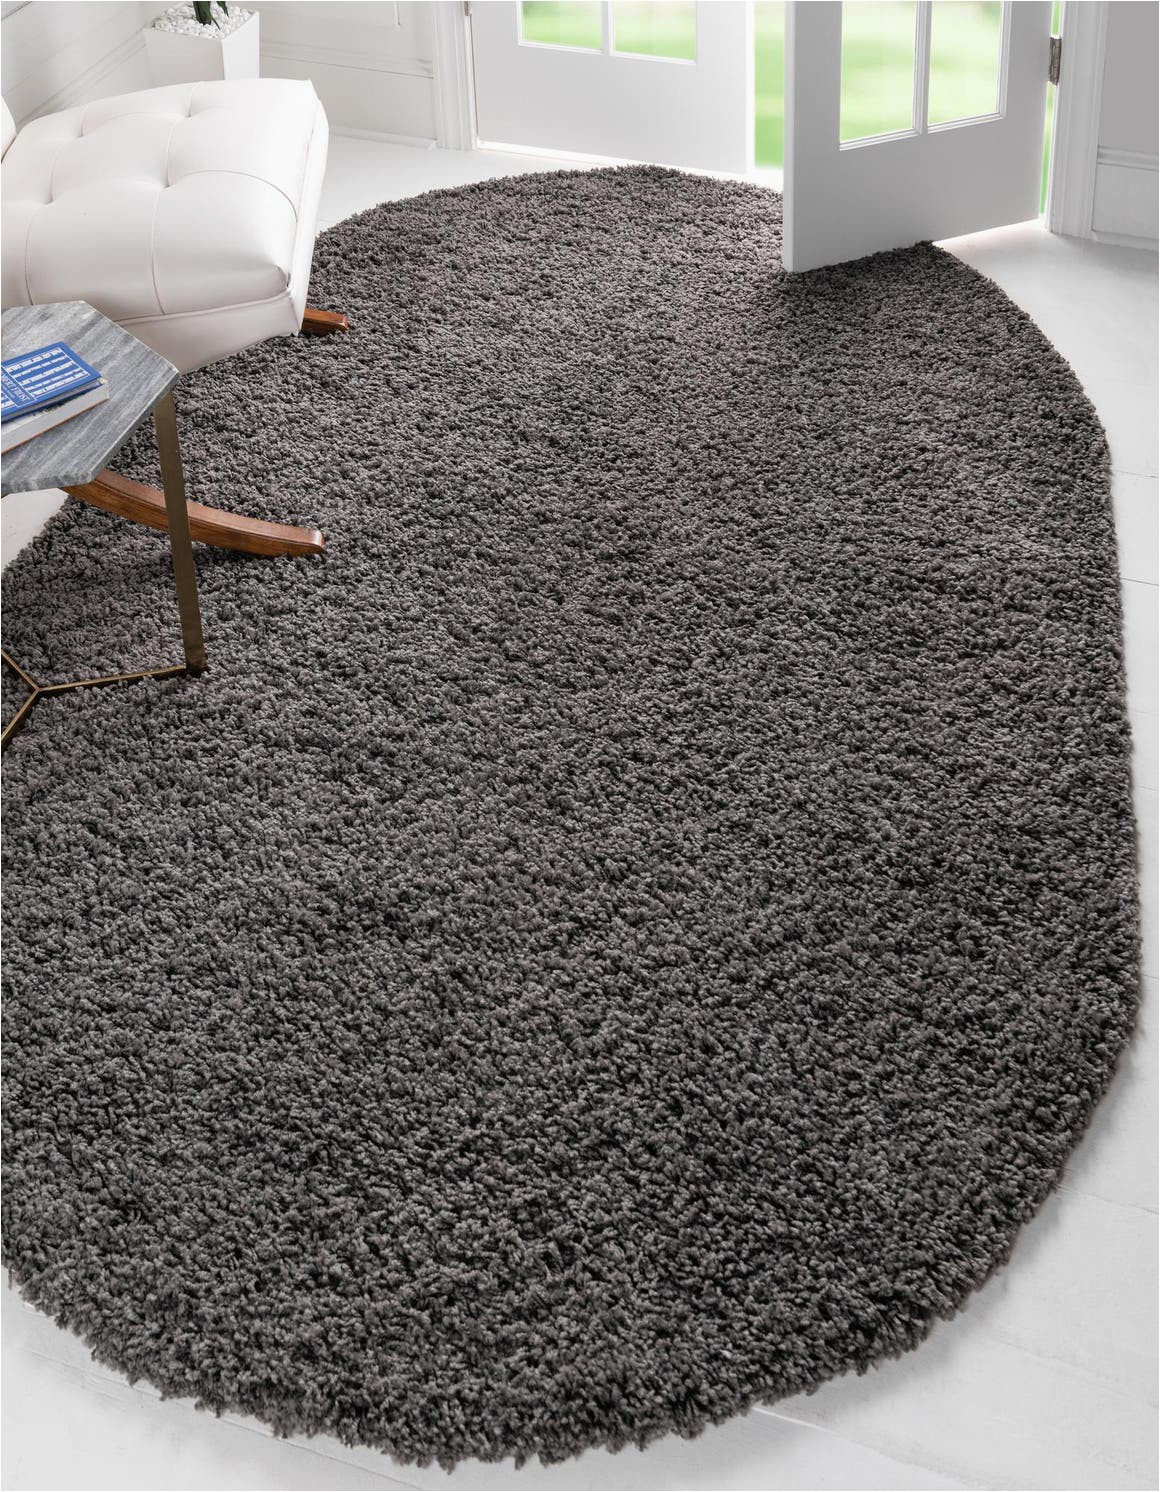 Solid Grey area Rug 8×10 Graphite Gray 8 X 10 solid Shag Oval Rug